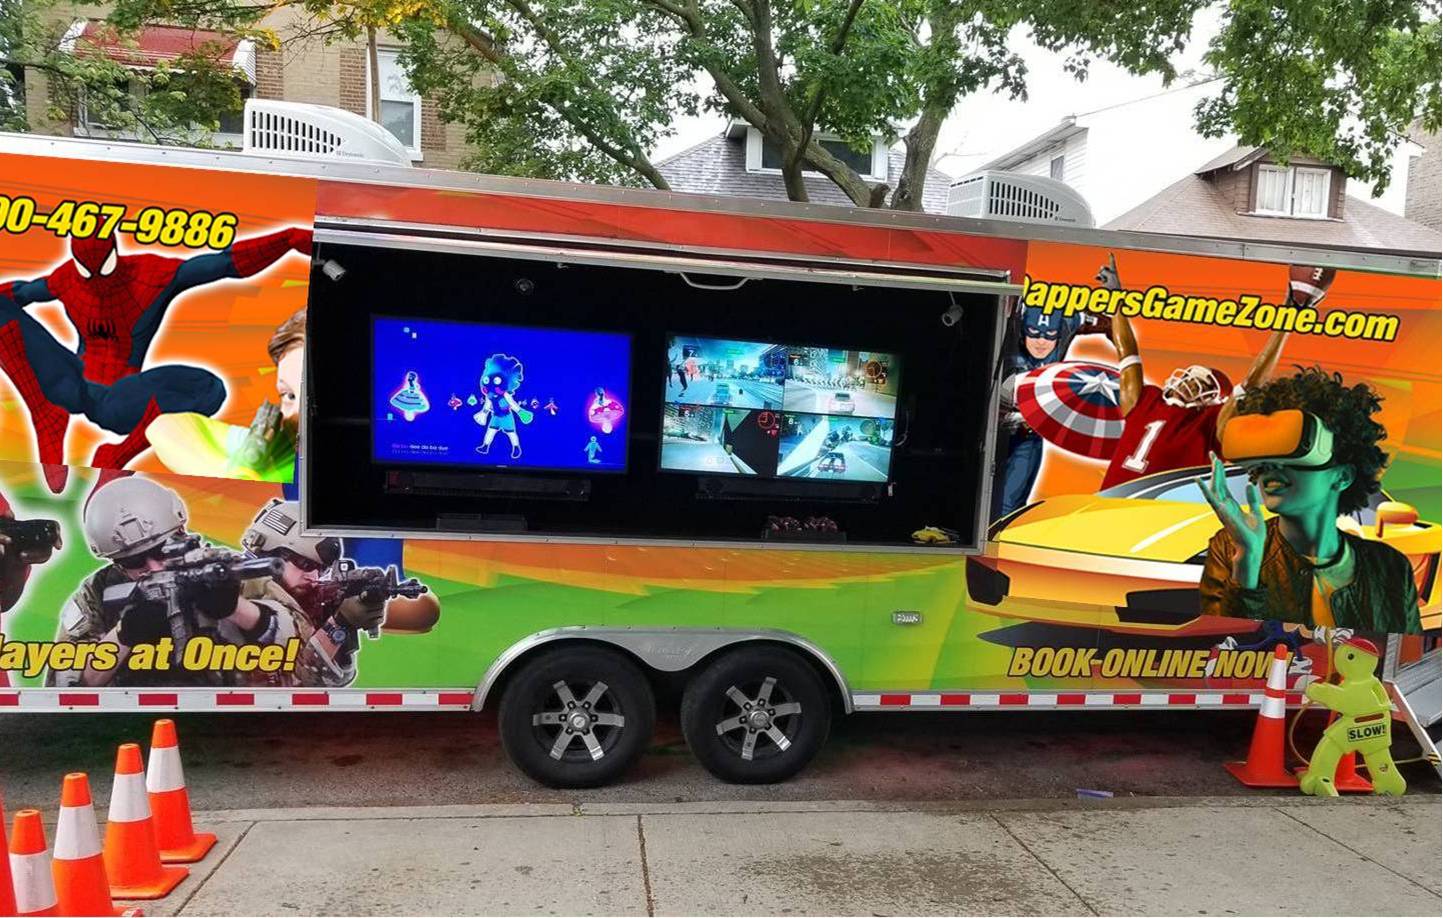 Video game truck party in Chicago - Dappers Game Zone